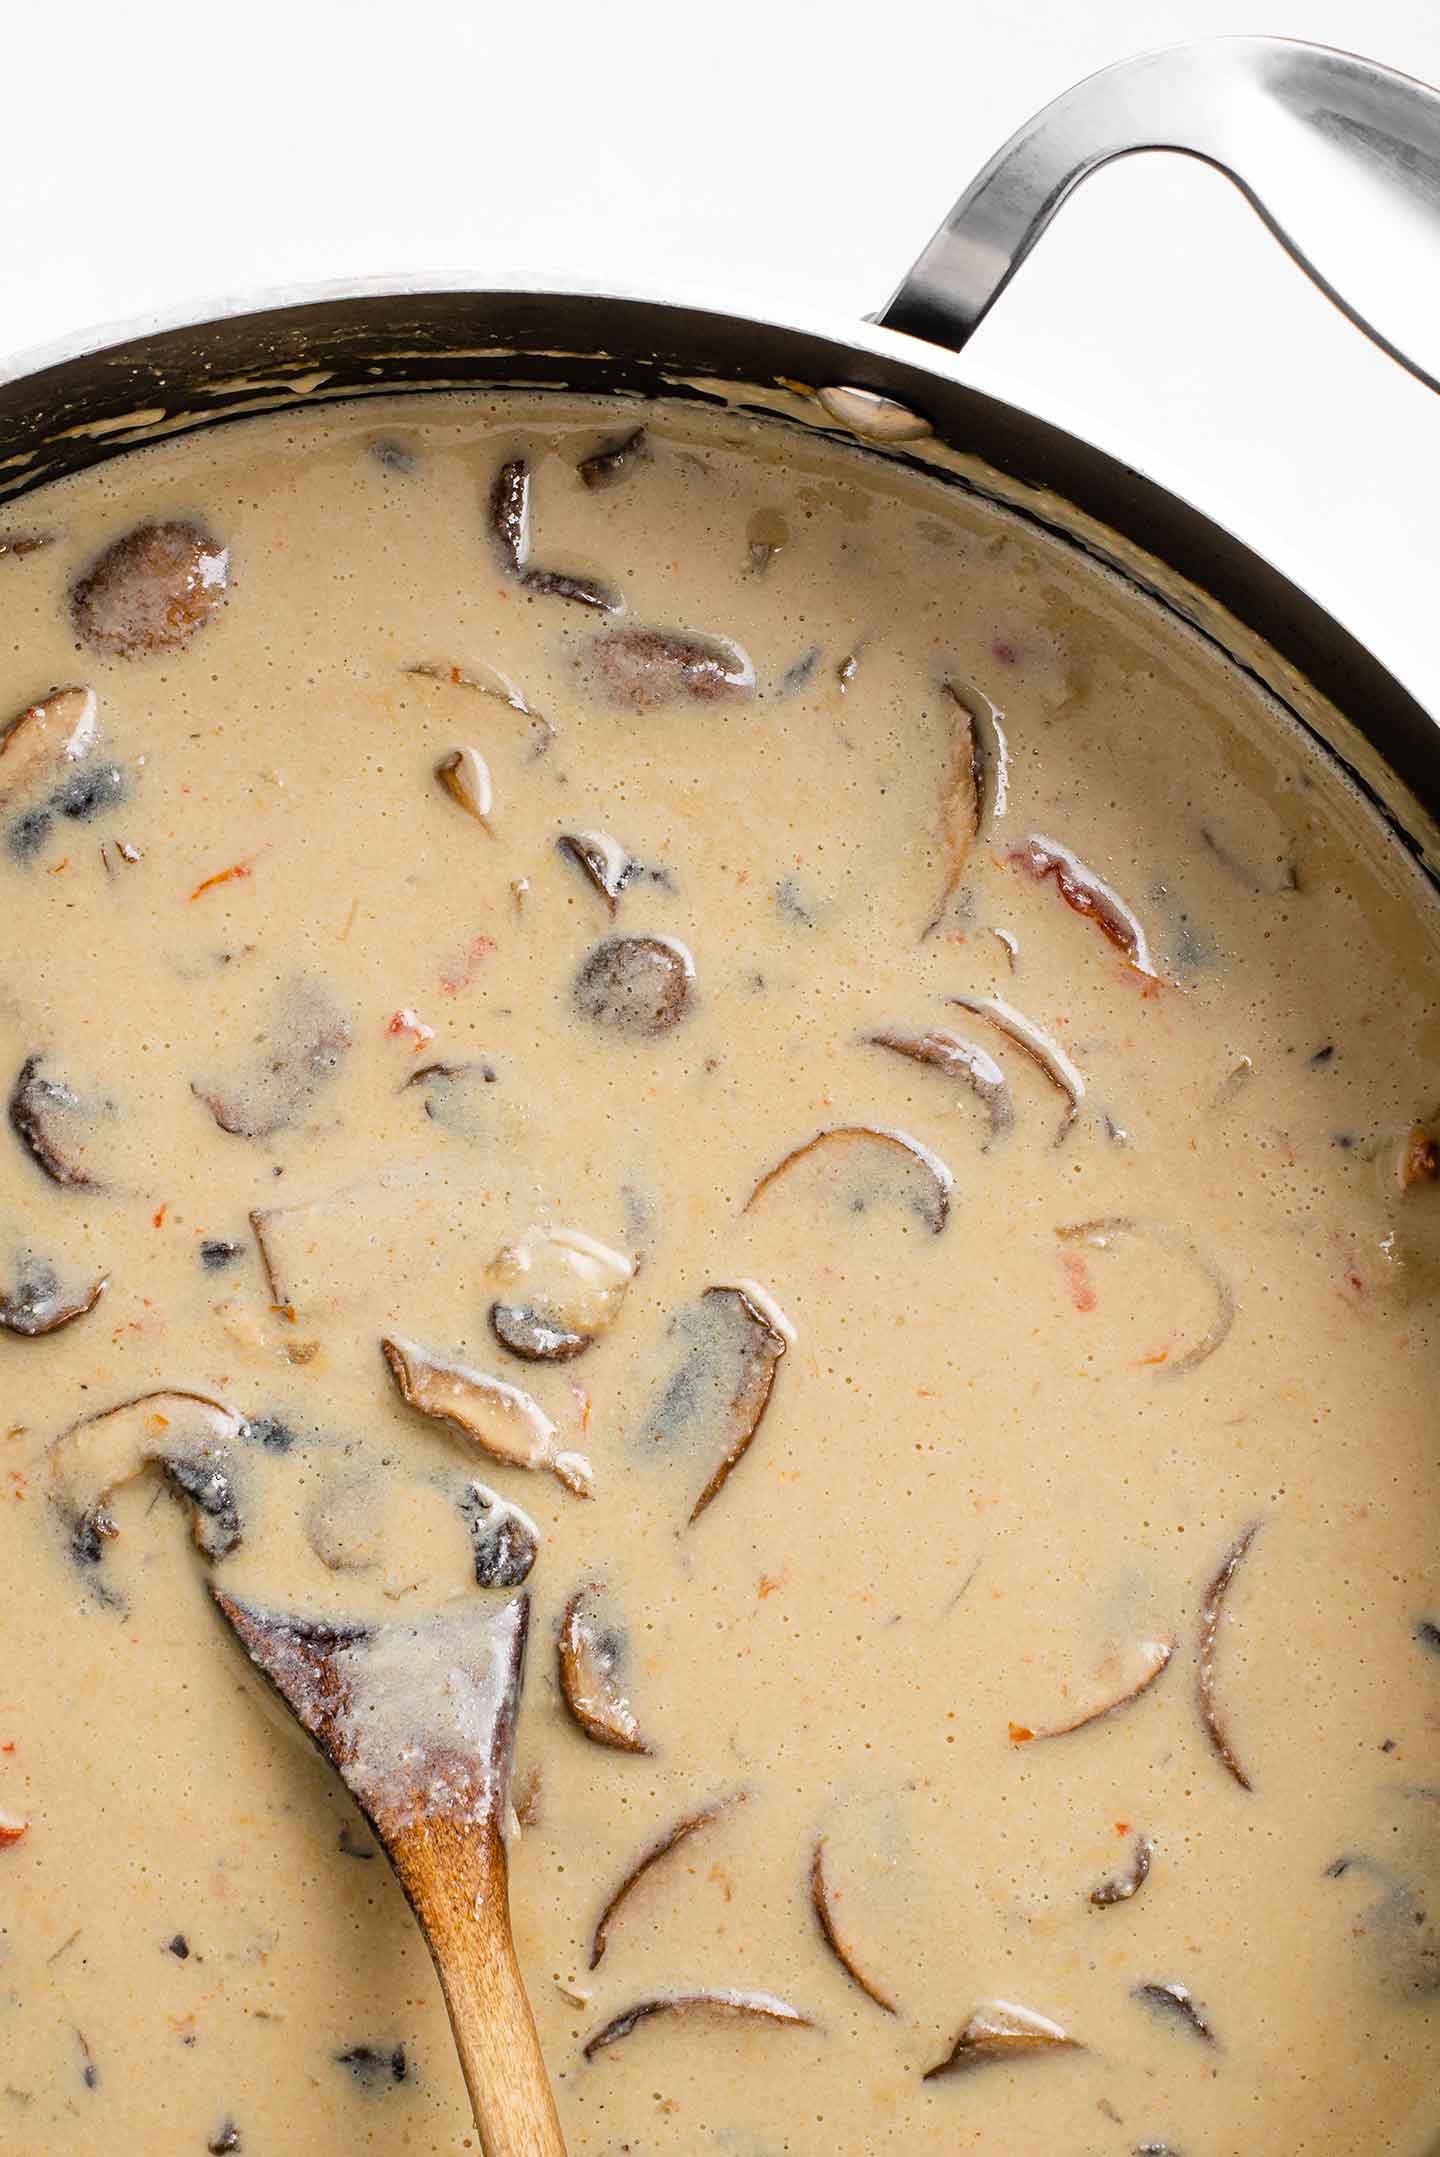 Top down view of creamy speedy stroganoff in a saucepan before the noodles are added. The sauce is thick, a light brown colour from the sour cream and the dark broth, and it's full of mushrooms and sun-dried tomato.